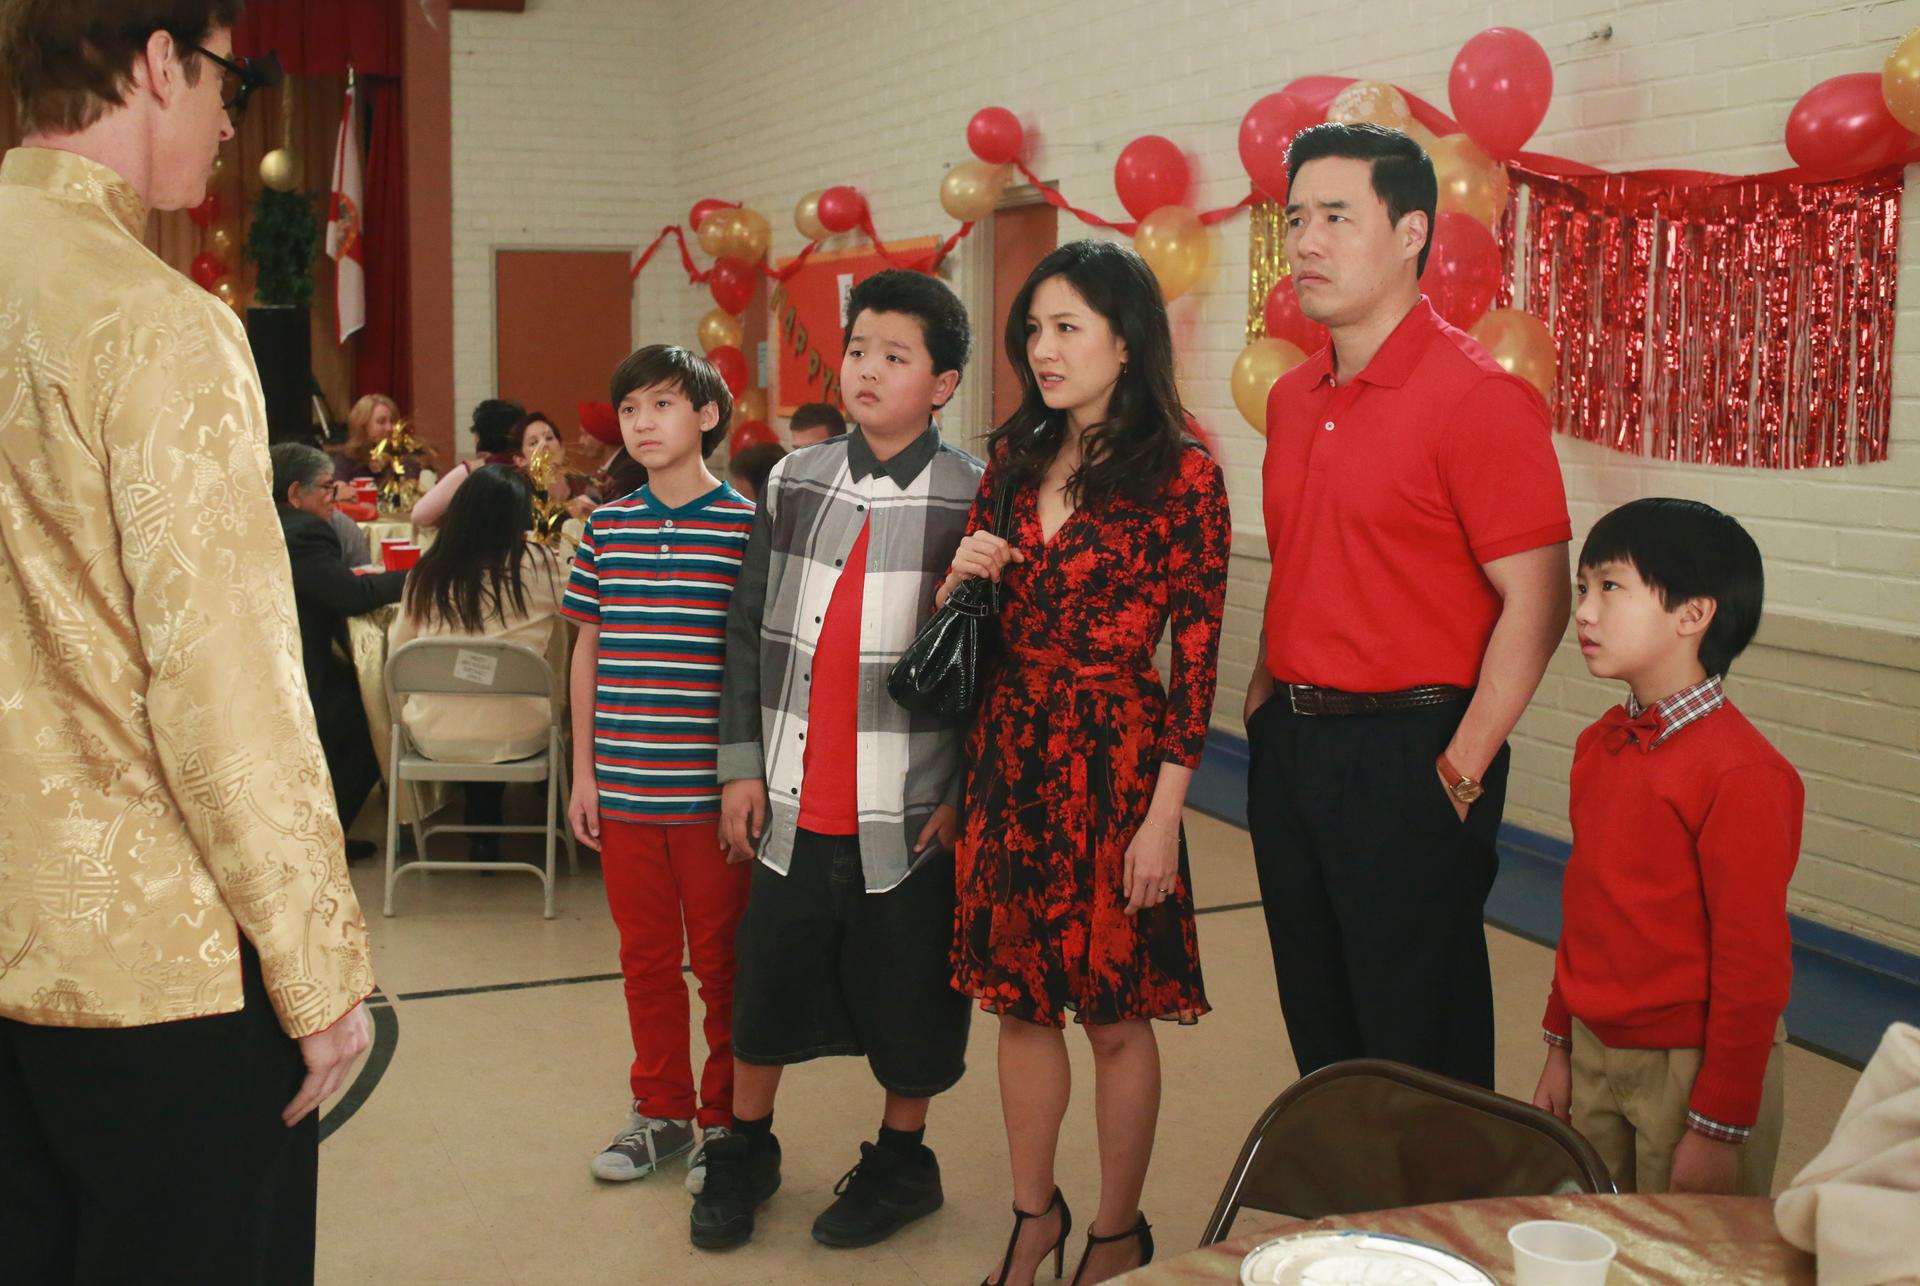 Four members of the Huang family at a Chinese New Year celebration in the show "Fresh Off the Boat"